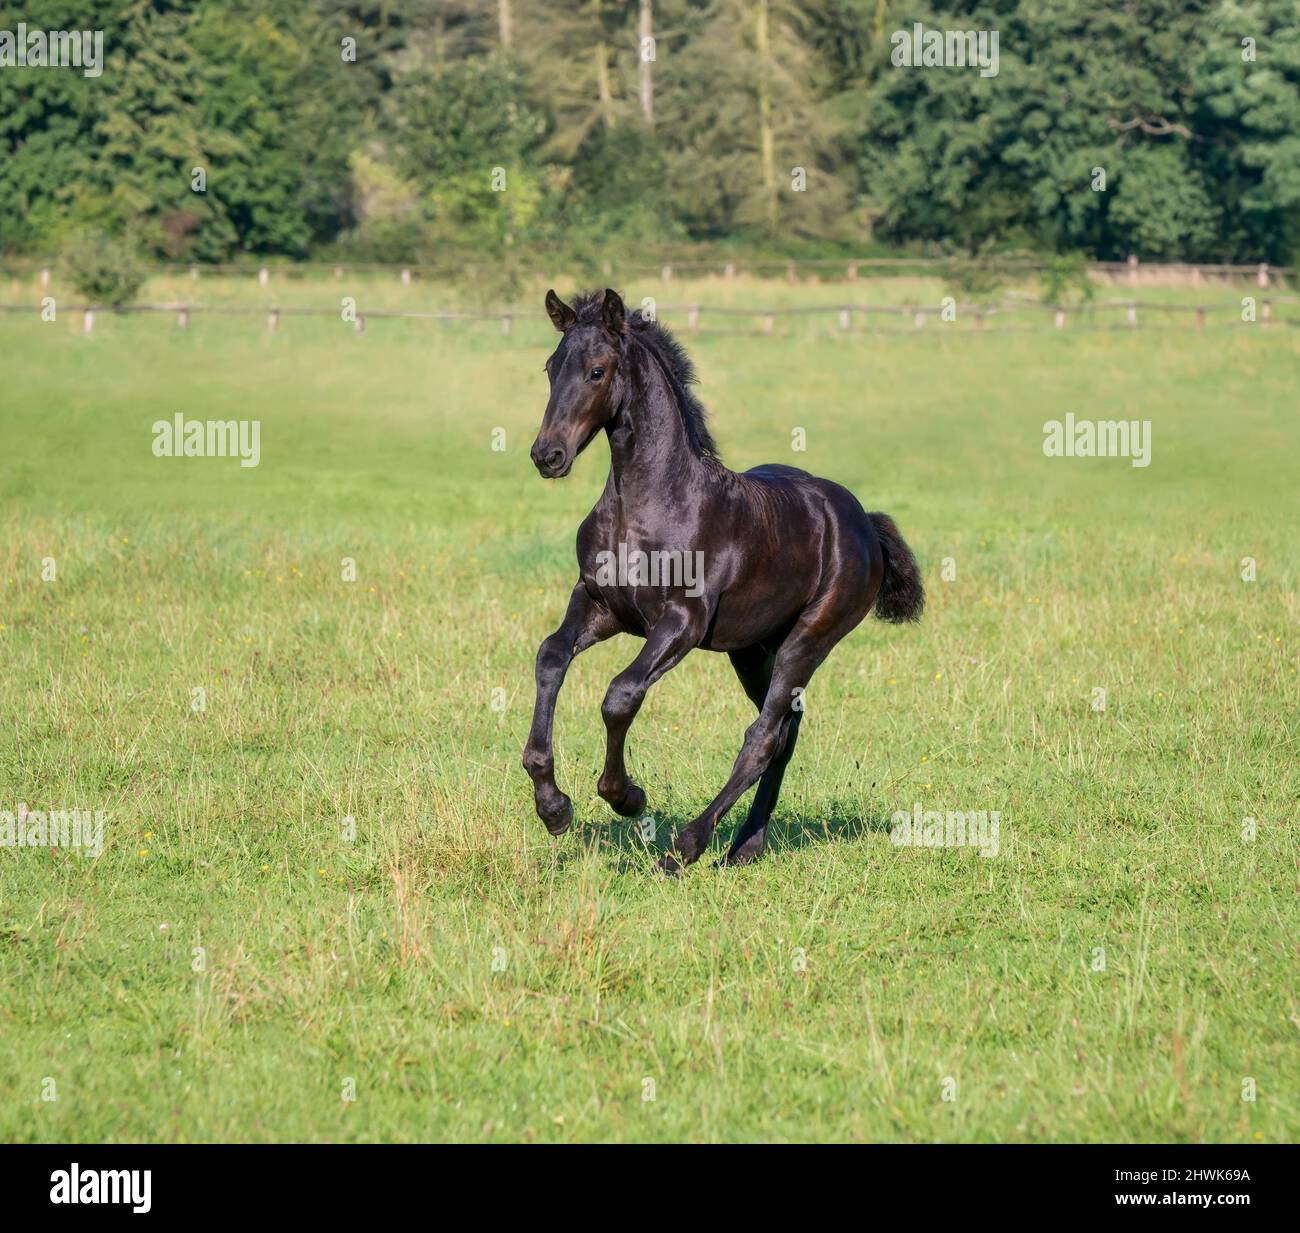 A cute 3 month old foal, male barock black, warmblood horse baroque type, run at a gallop in a green grass meadow, Germany Stock Photo